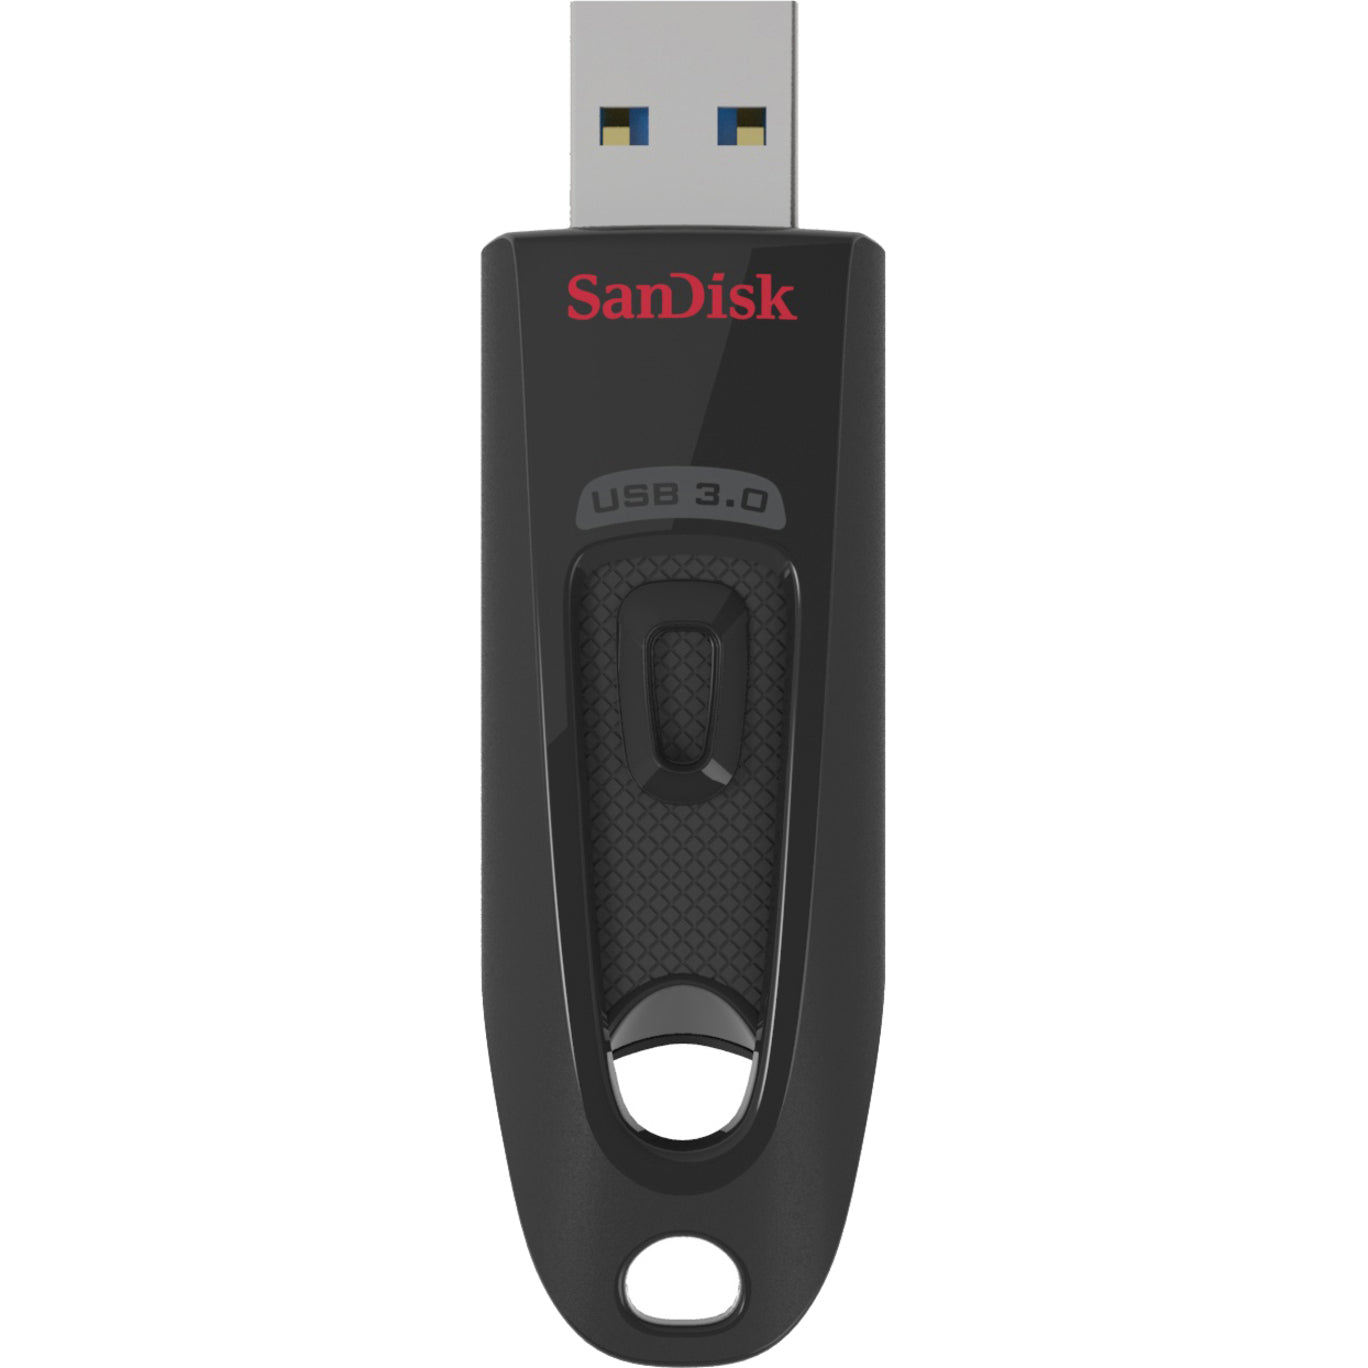 SanDisk SDCZ48-032G-A46 Ultra USB 3.0 Flash Drive, 32GB, Password Protection, Encryption Support